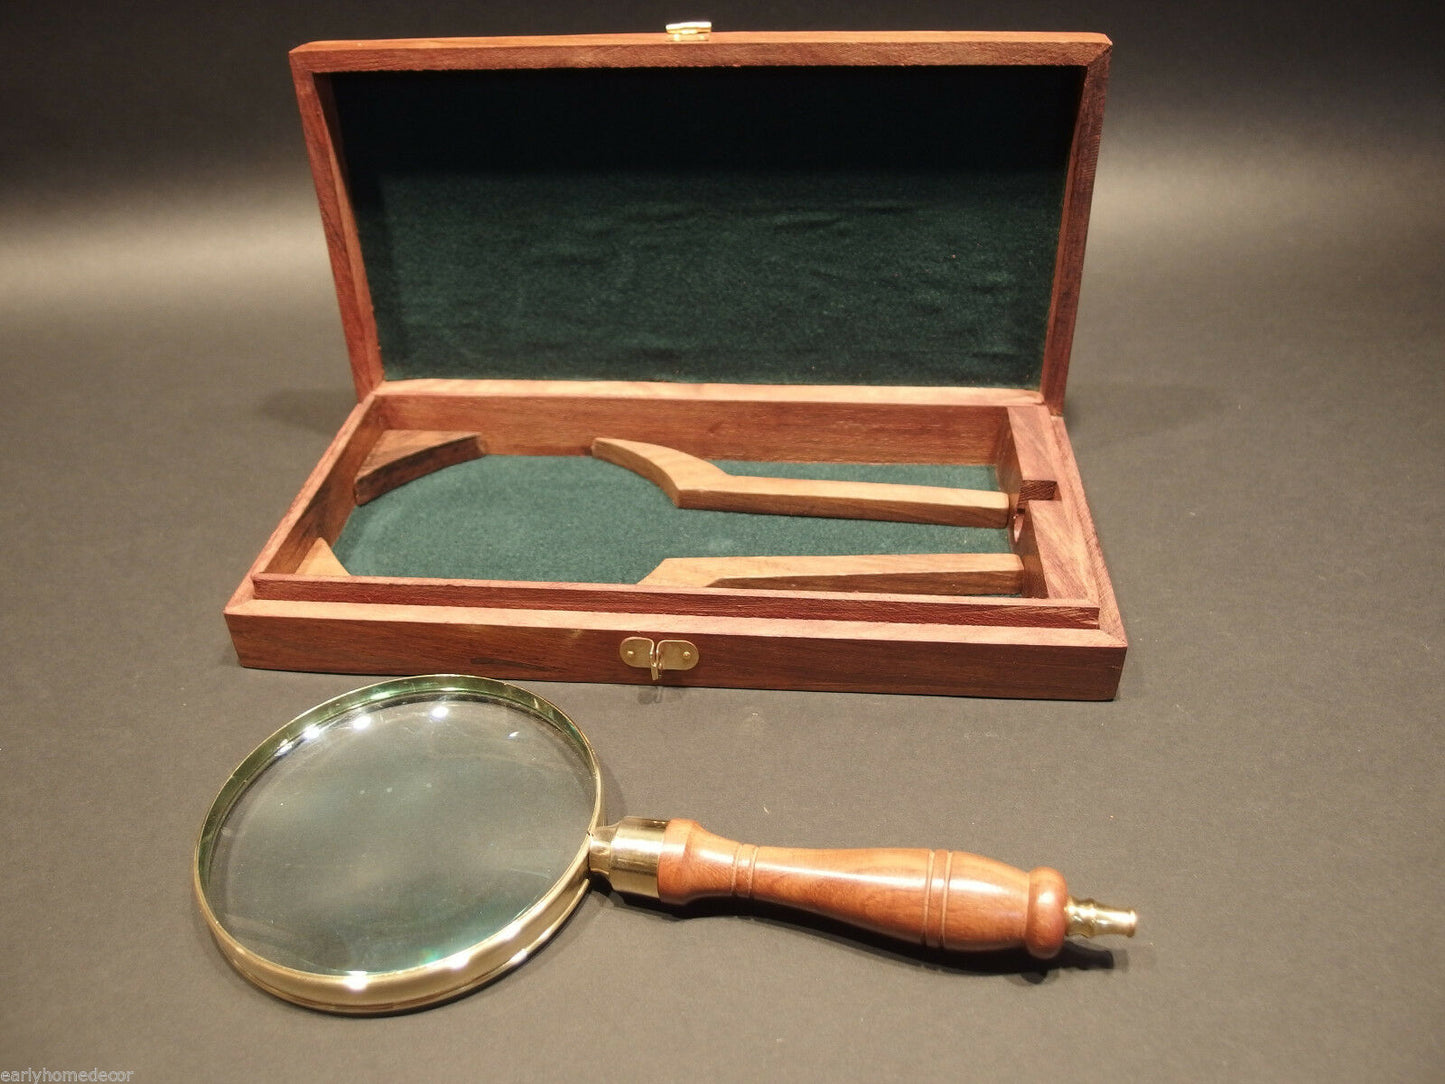 4" 5x Antique Style Magnifying Glass Brass w Wood Turned Hand Lens Desktop Box - Early Home Decor